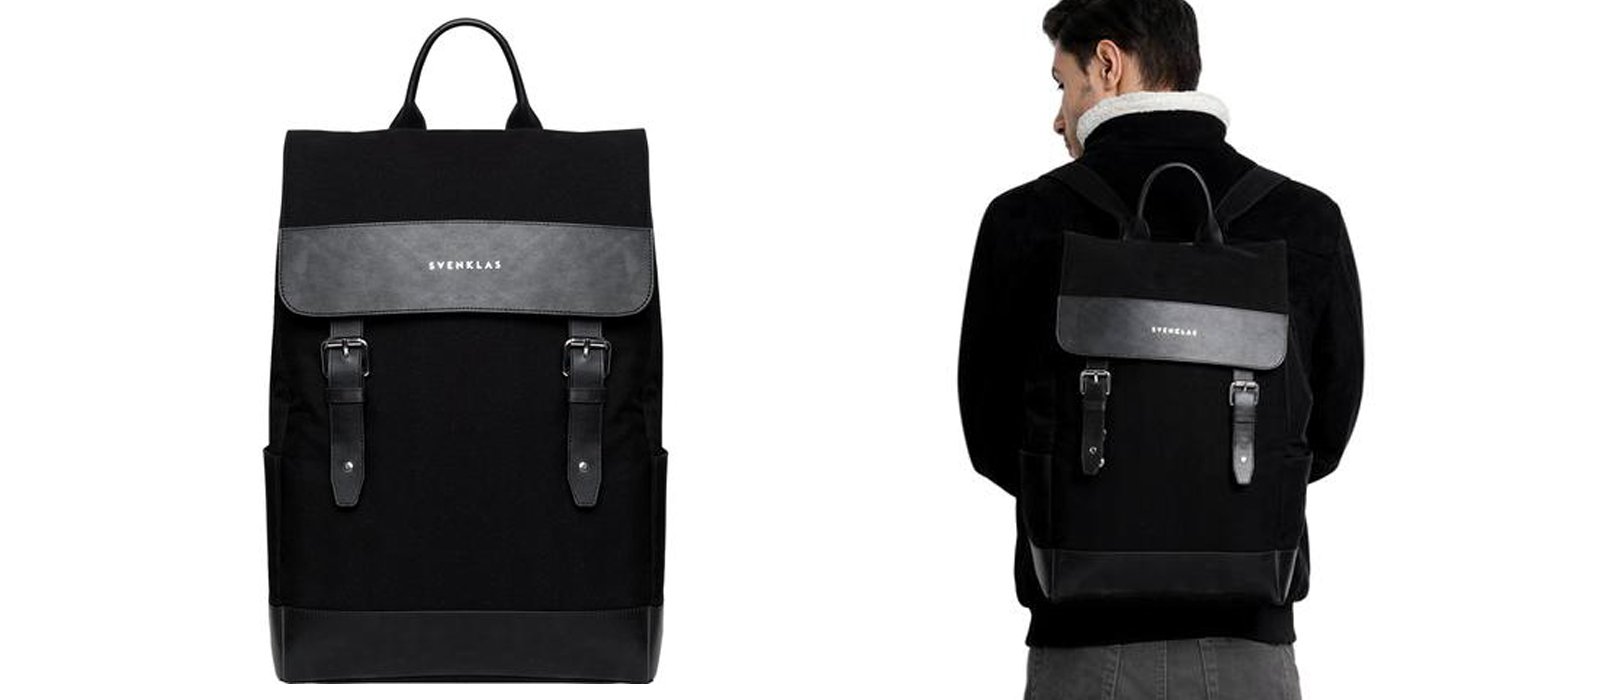 If You Are Thinking To Get A Backpack Here’s what you’ll get with Amber Black Backpack by Svenklas